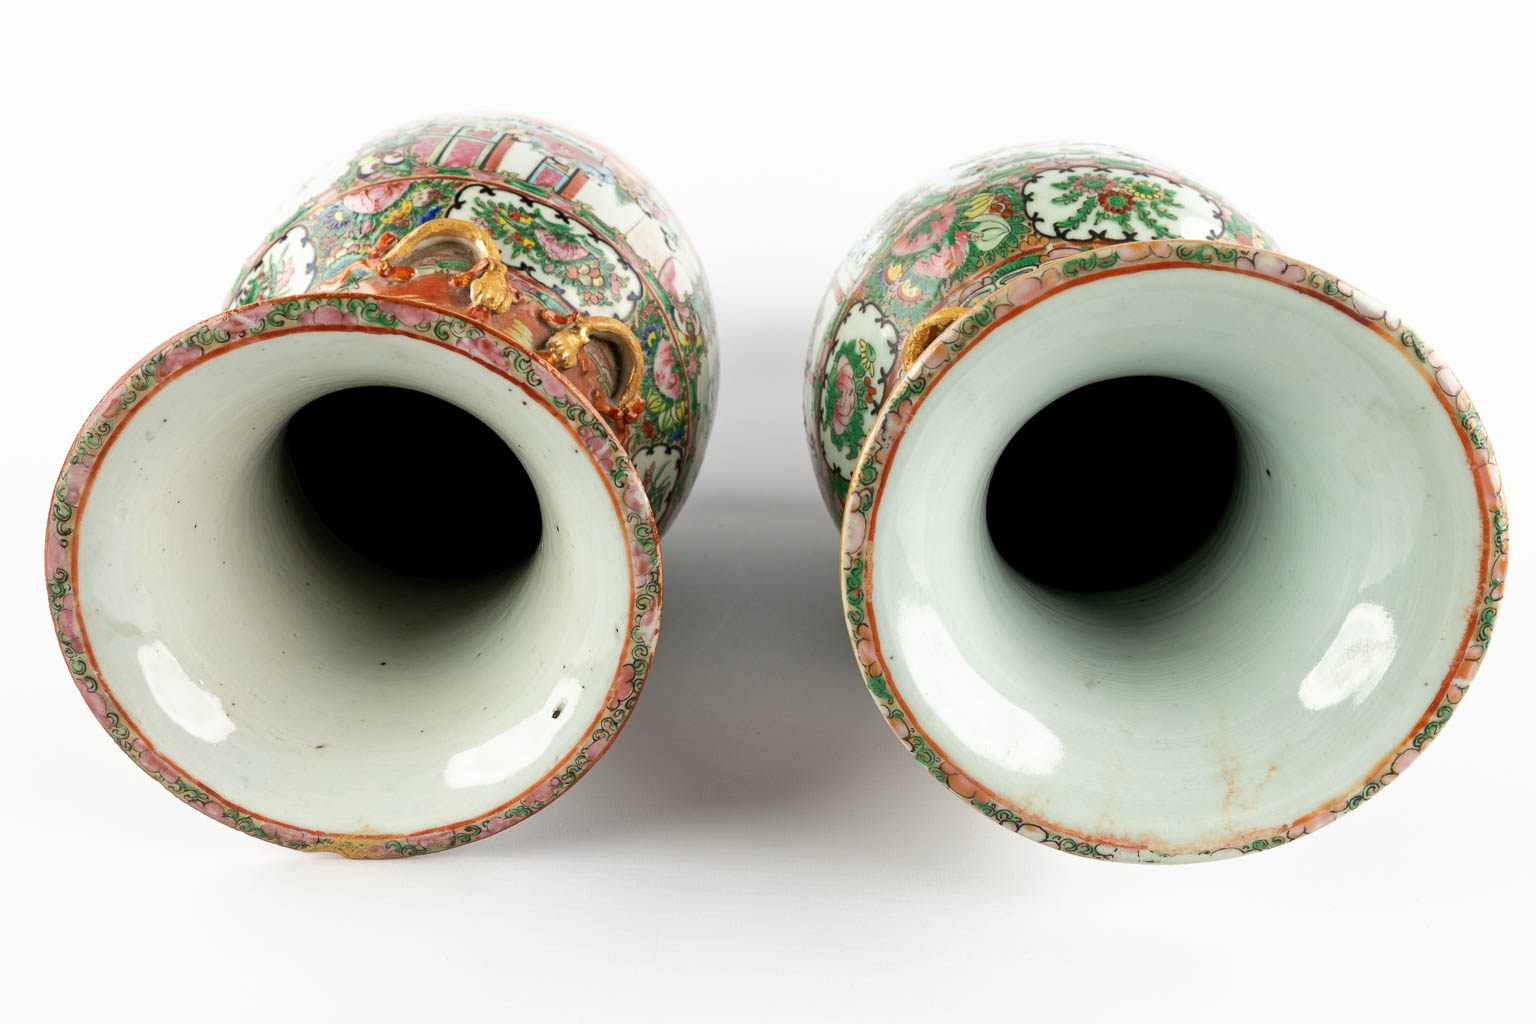 Two Chinese Canton vases, 19th/20th C. (H:45 x D:20 cm)